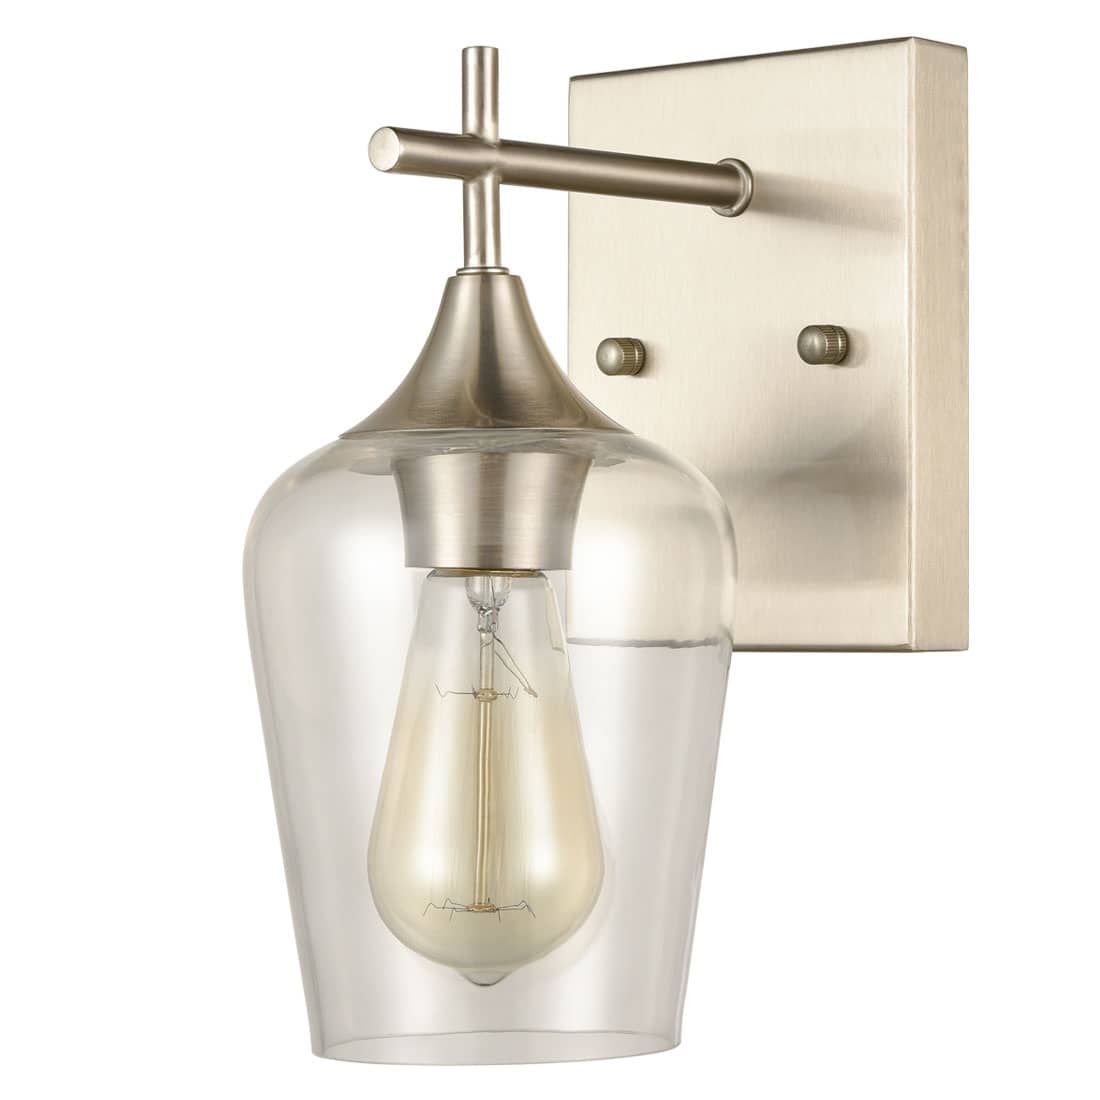 Modern Wall Sconces Brushed Nickel Bathroom Wall Sconces